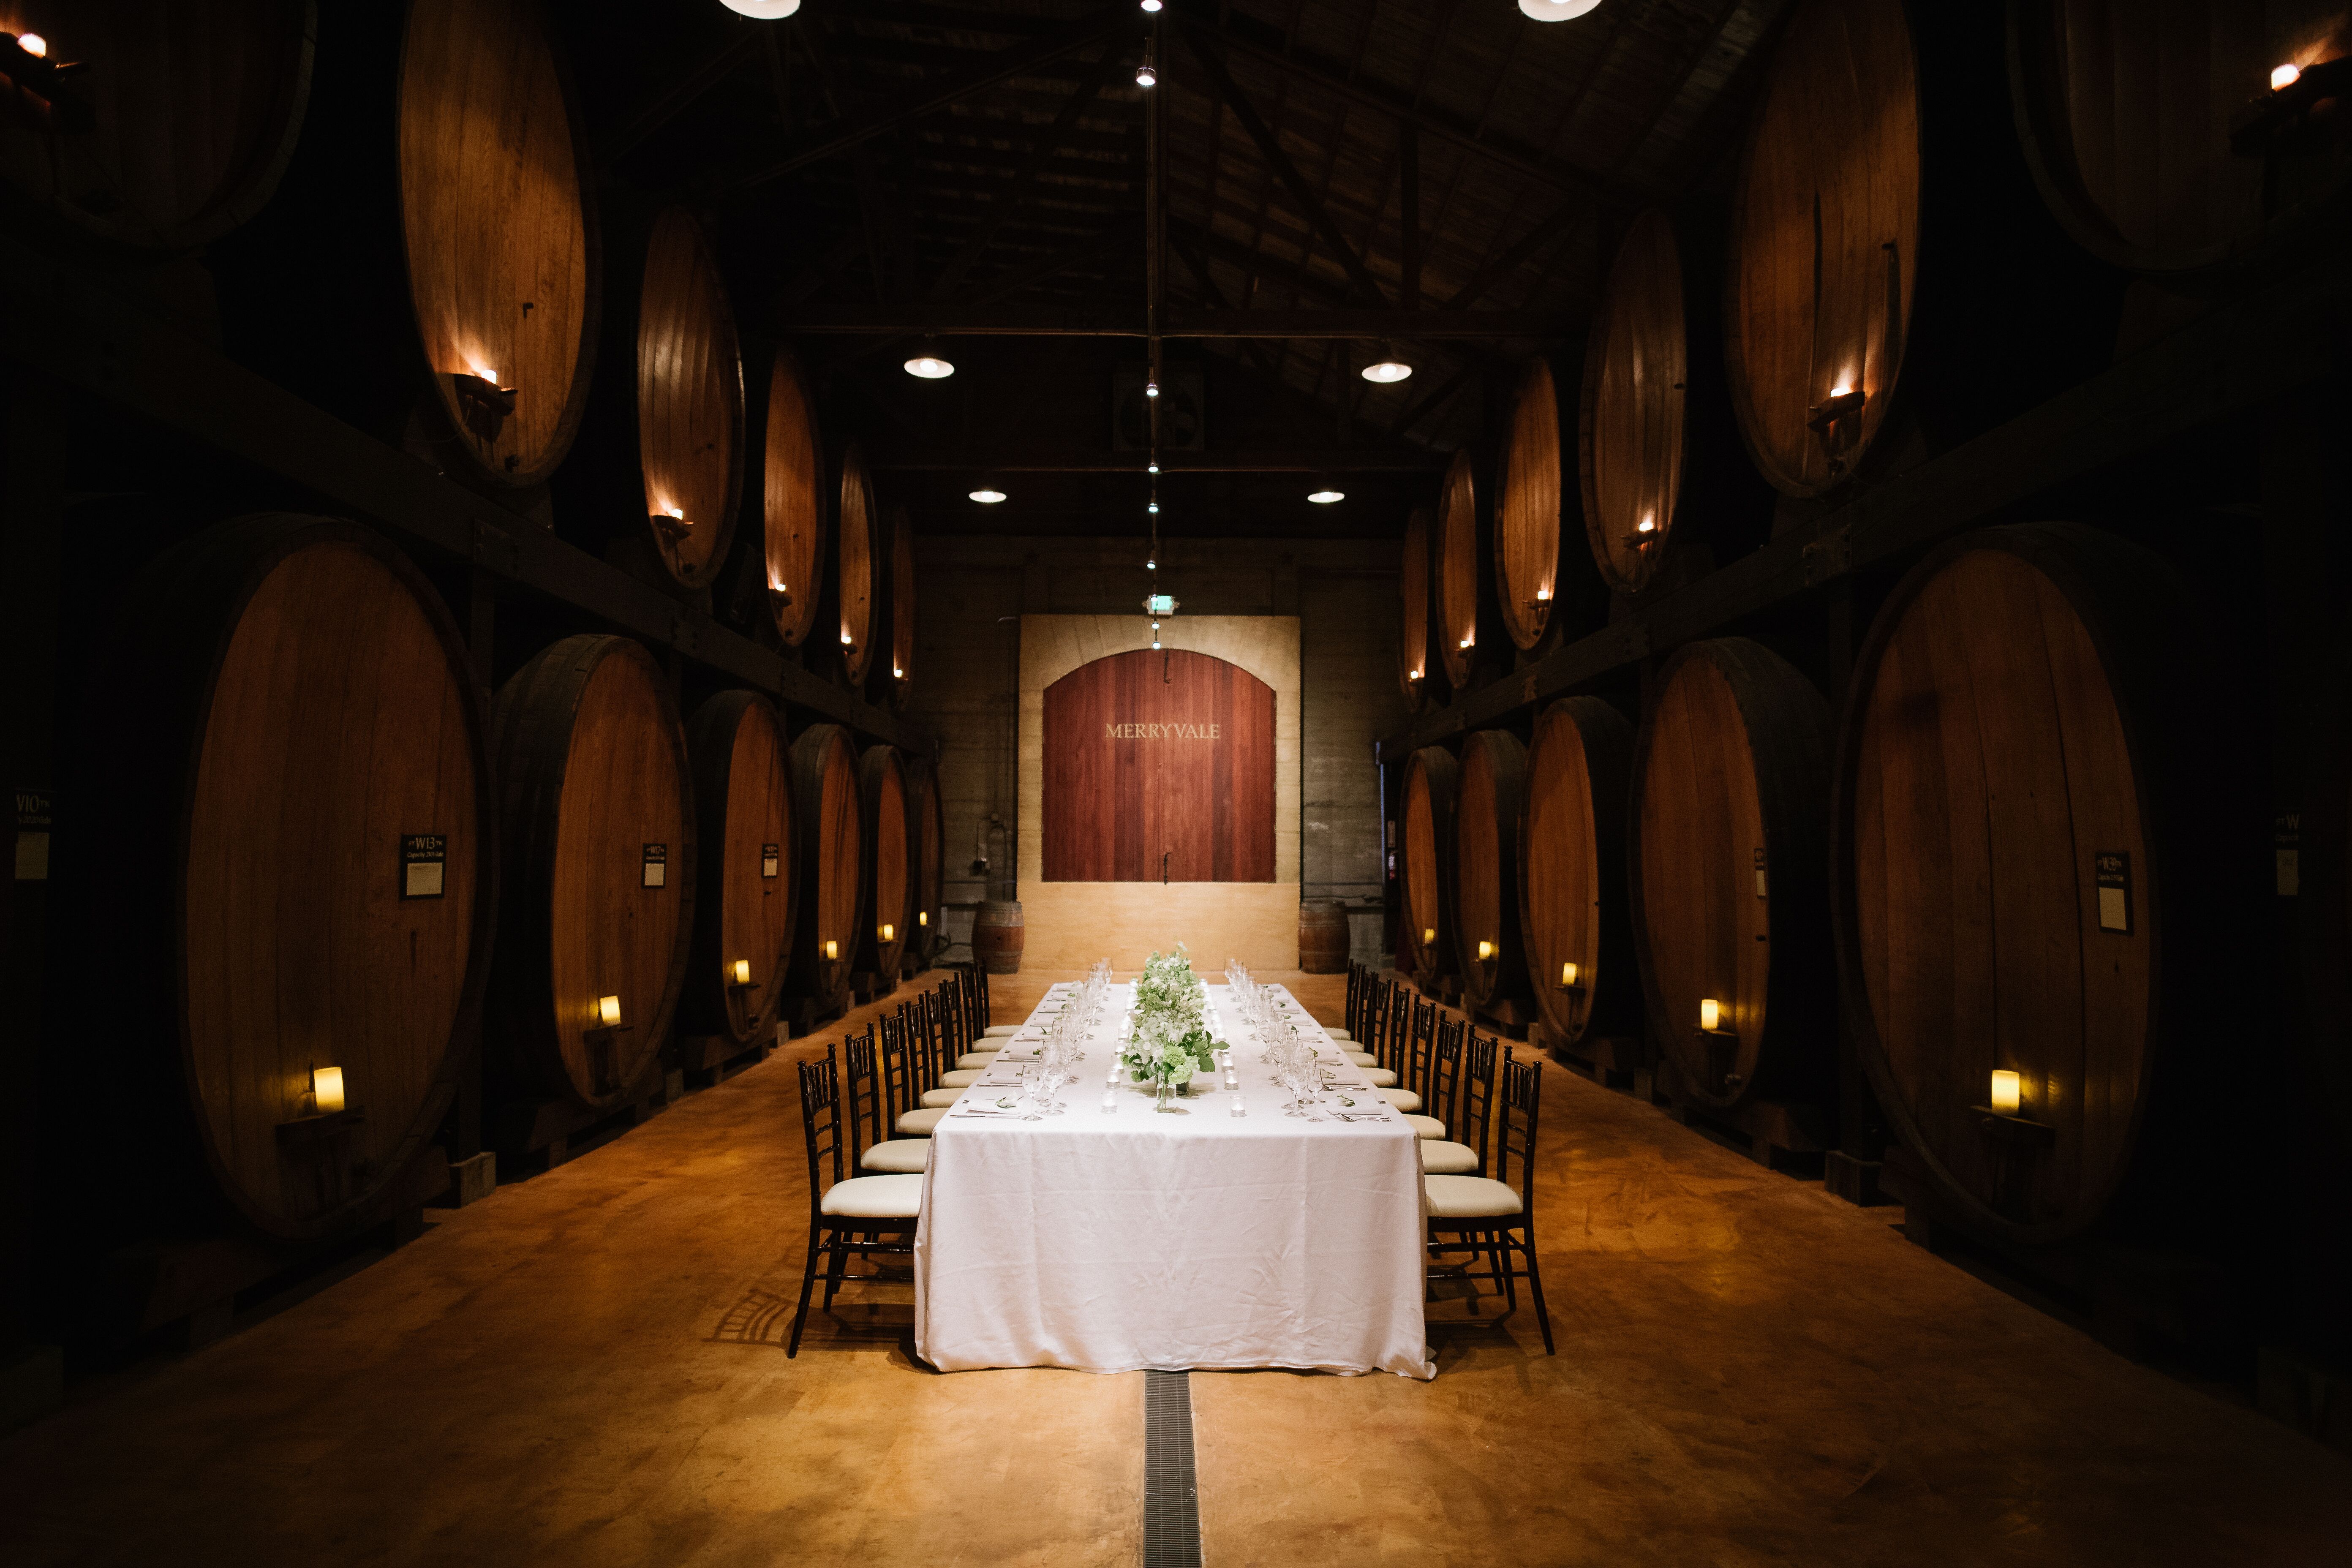 Merryvale Winery wine cellar with long white table set with a floral garland in the middle and chairs on either side